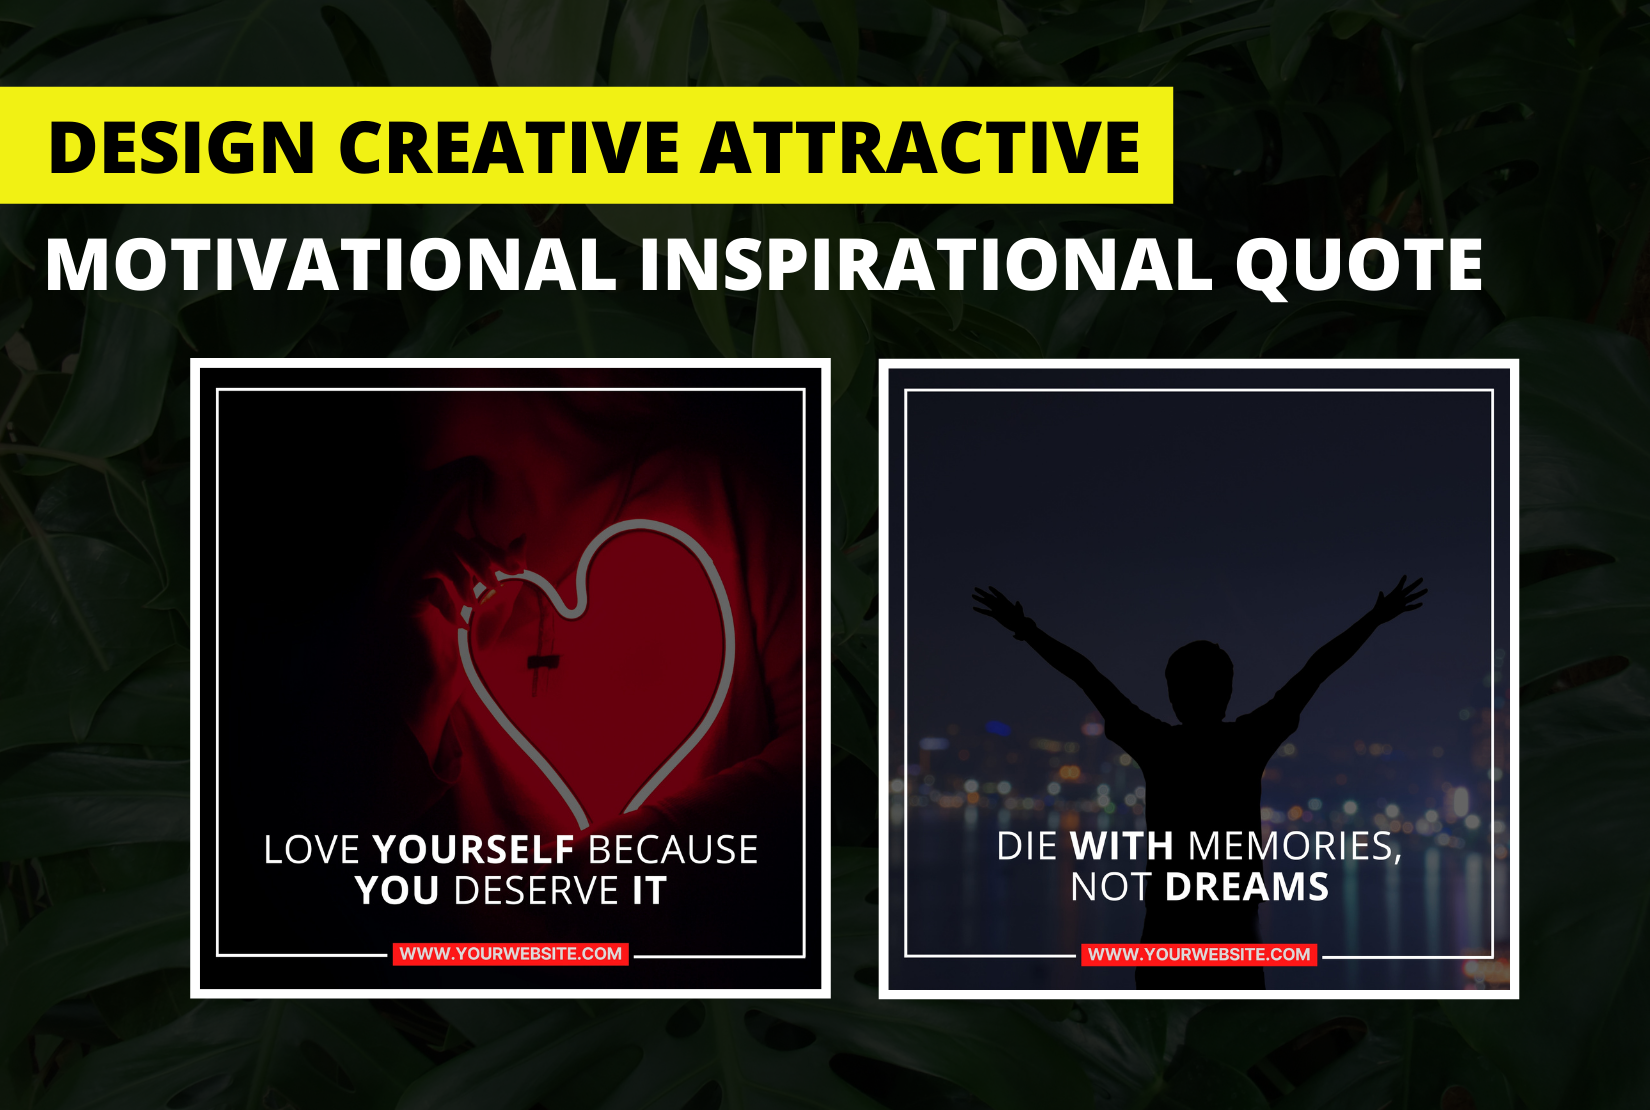 I will Design creative attractive motivational inspirational quotes